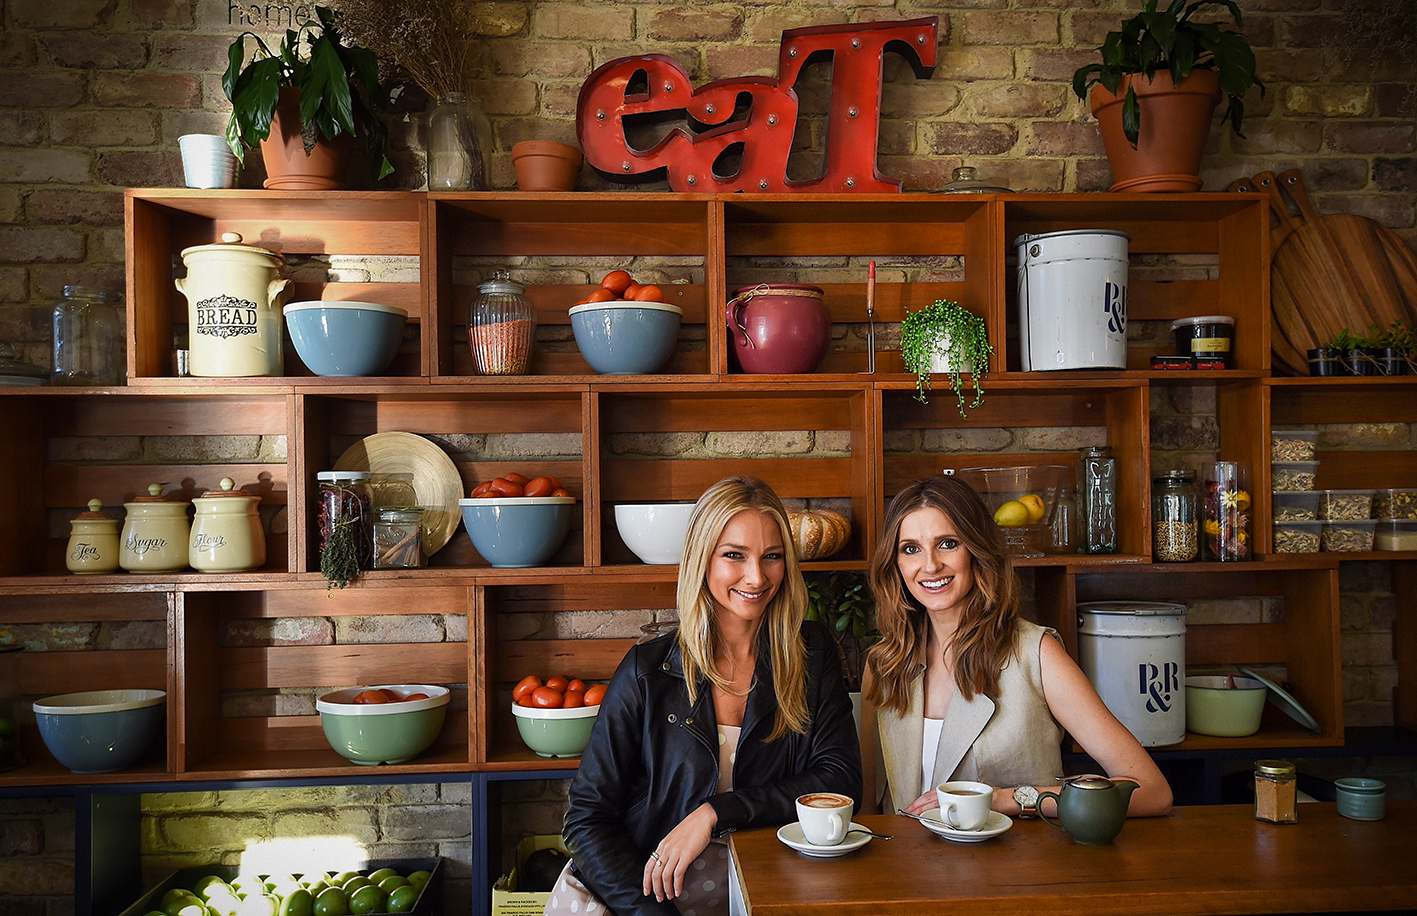 Anna Heinrich (left) with Kate Waterhouse (right) at Wild Basket in Neutral Bay, Sydney. 28th June, 2016. Photo: Kate Geraghty